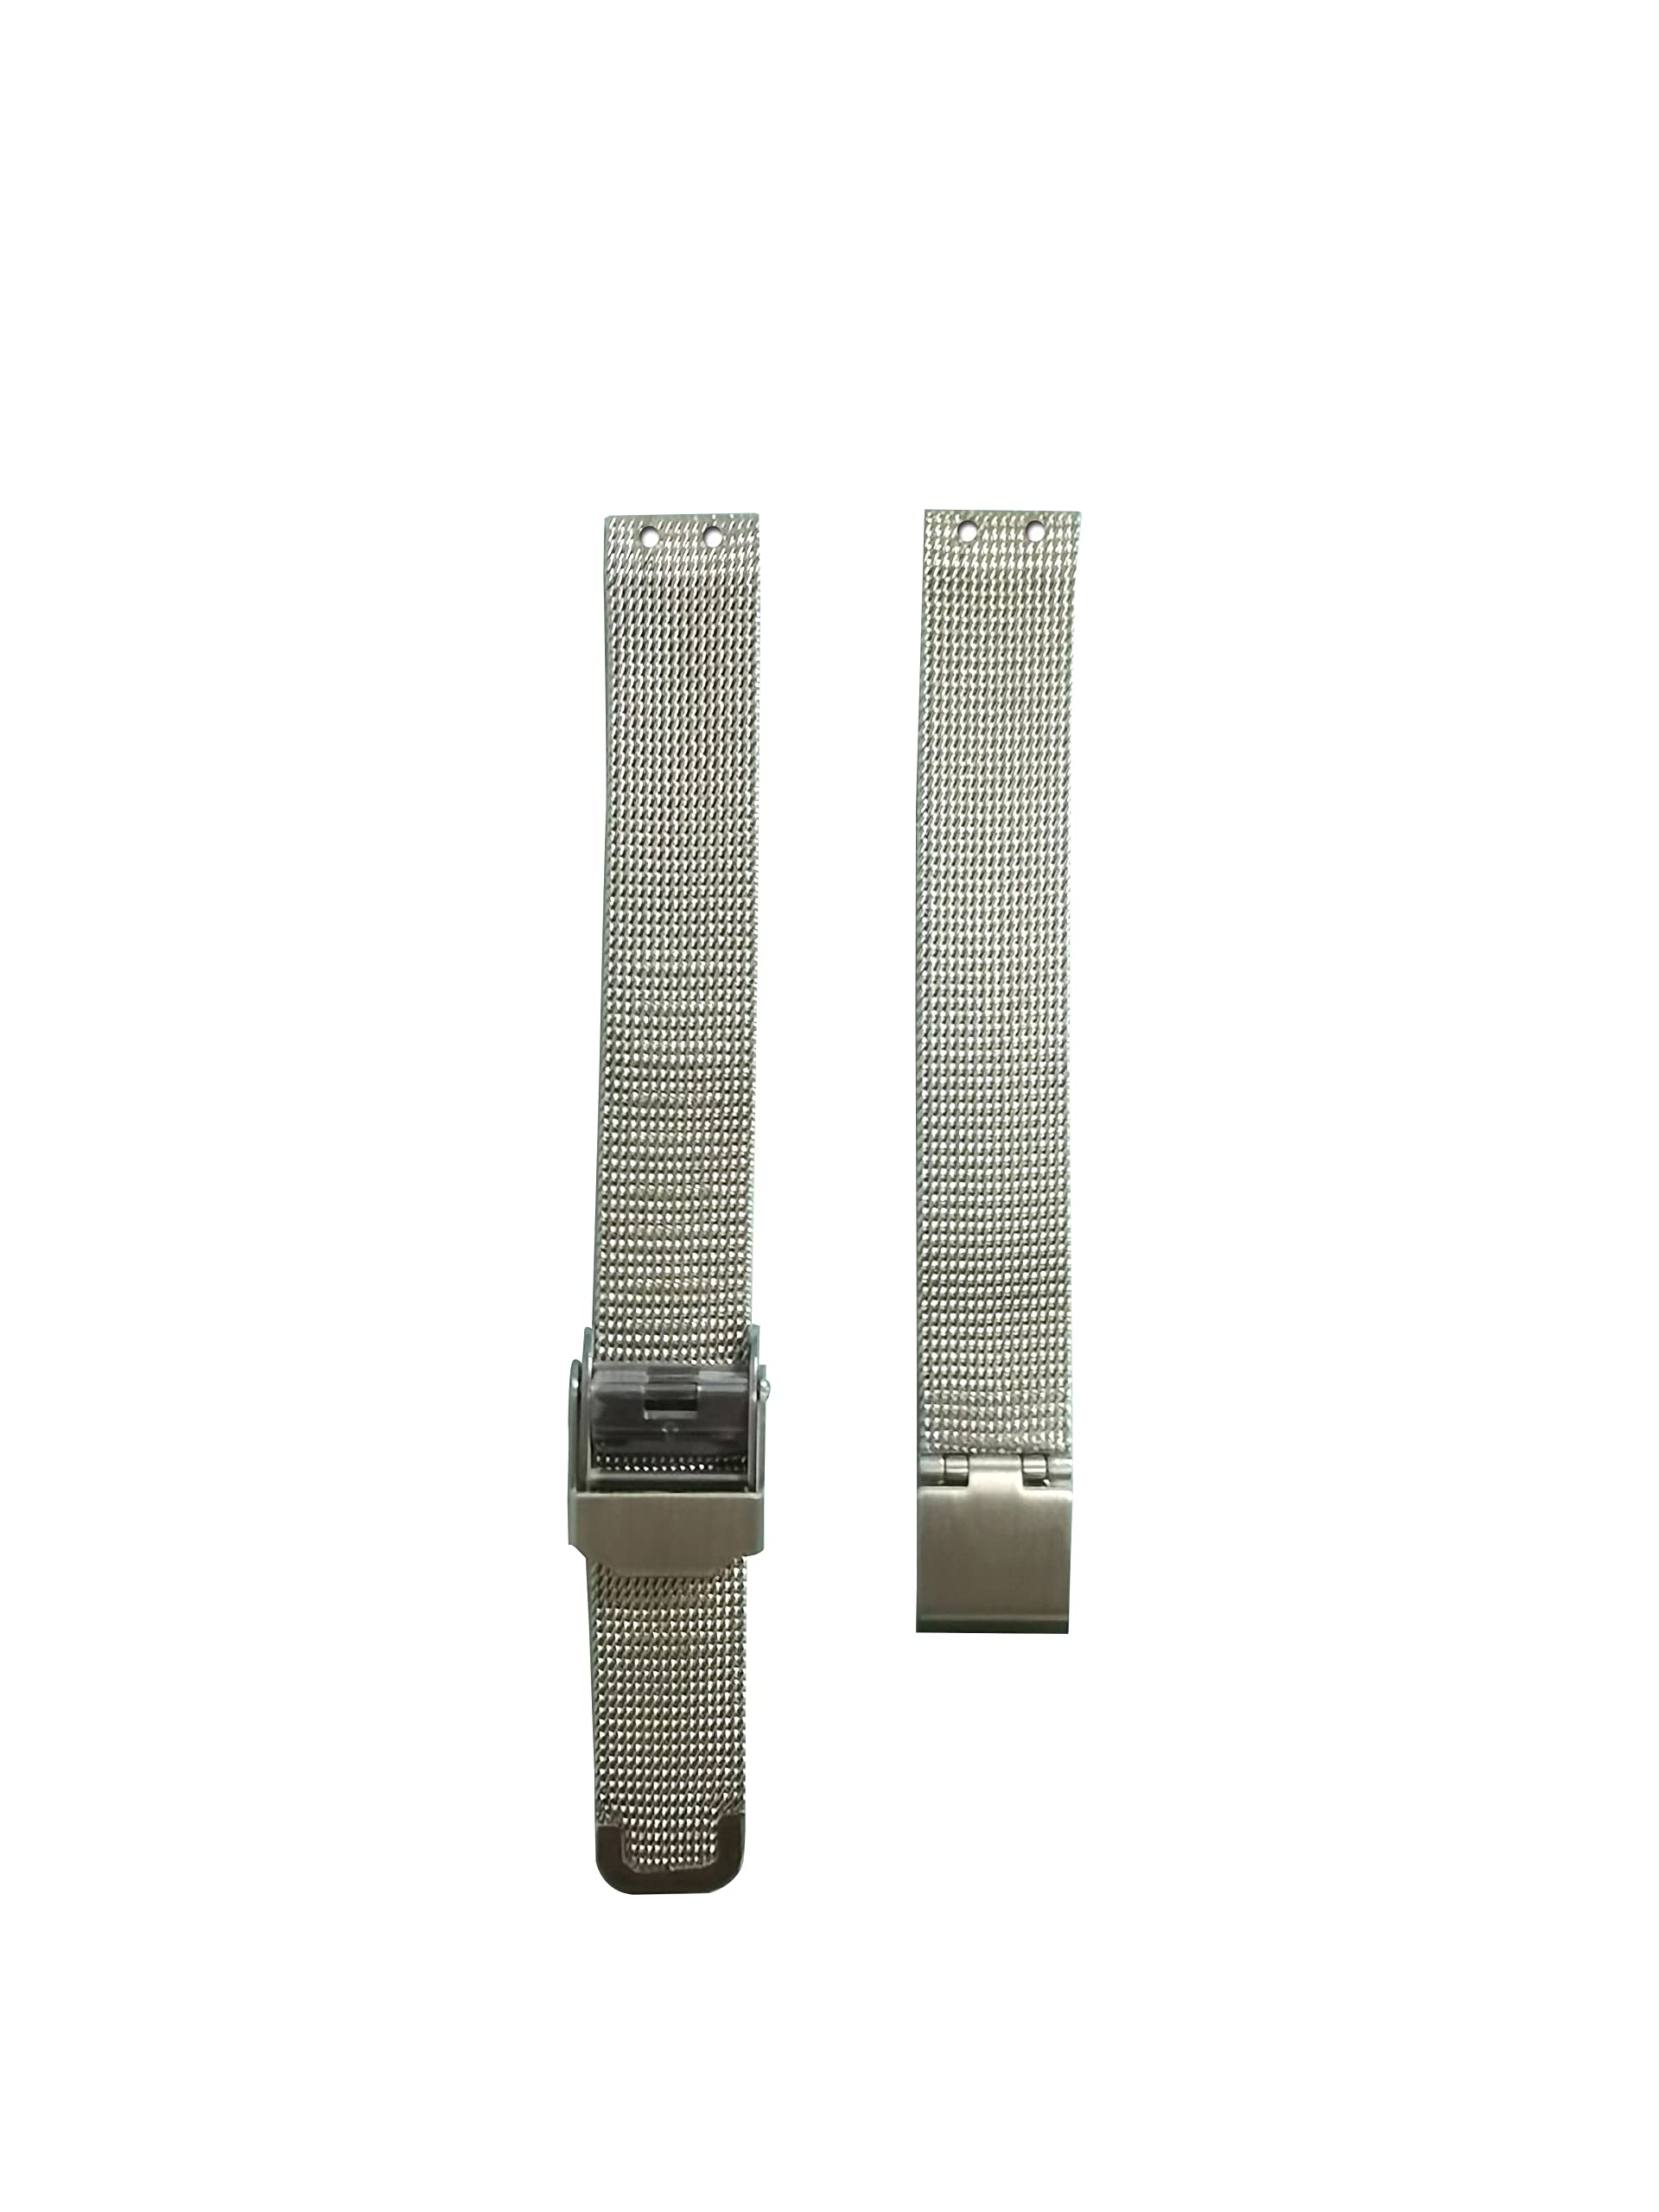 Replacement Watch Band for Bering Unisex Watch with Screw 12mm (hole spacing 5MM)